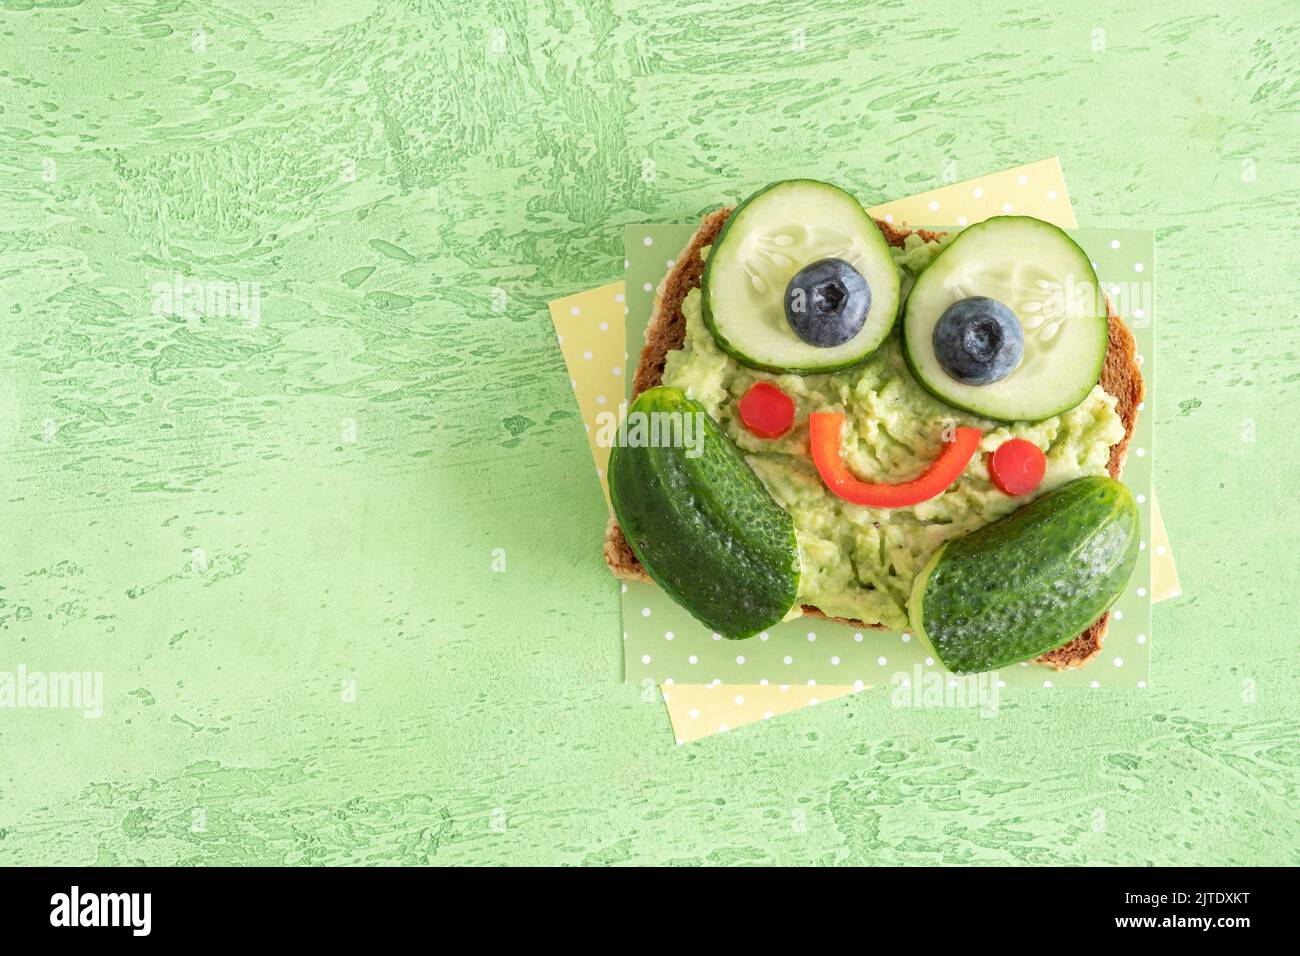 Funny Frog Toast With Cucumber And Mashed Avocado Stock Photo